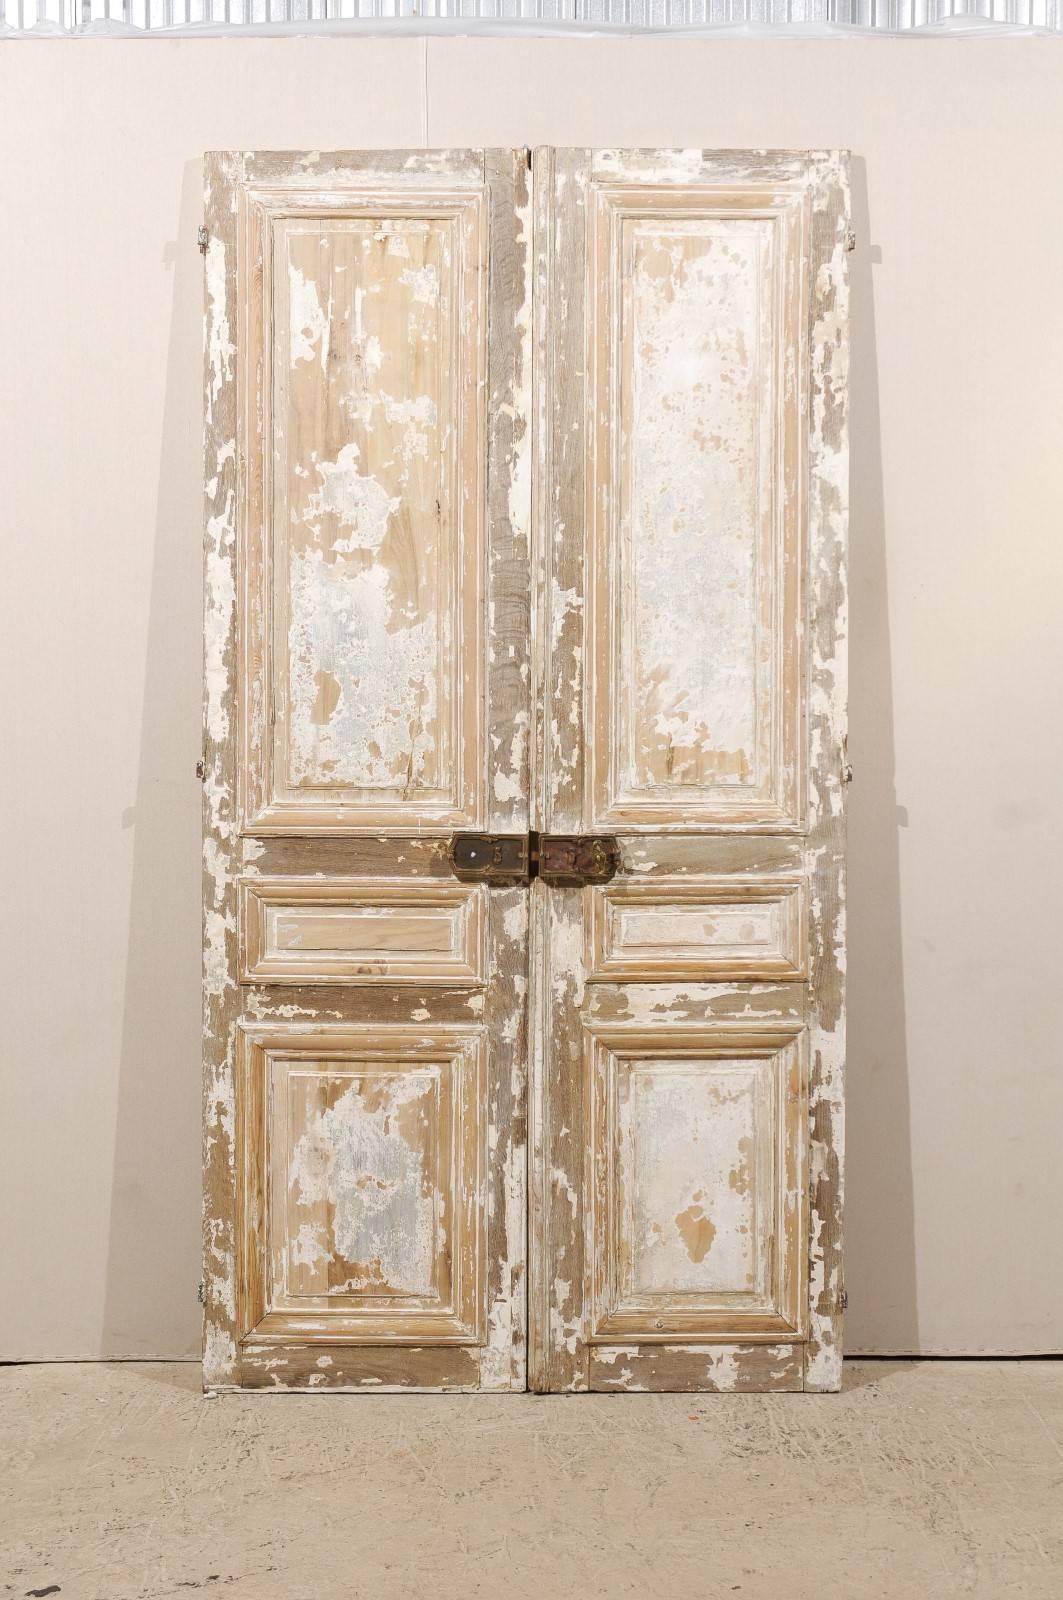 A pair of aged tall French doors from the mid-19th century. These doors have nice old hardware, adorned with acanthus leaf carvings. They have an off white / grey color with some taupe and a lot of wood coming through. These three panel French doors